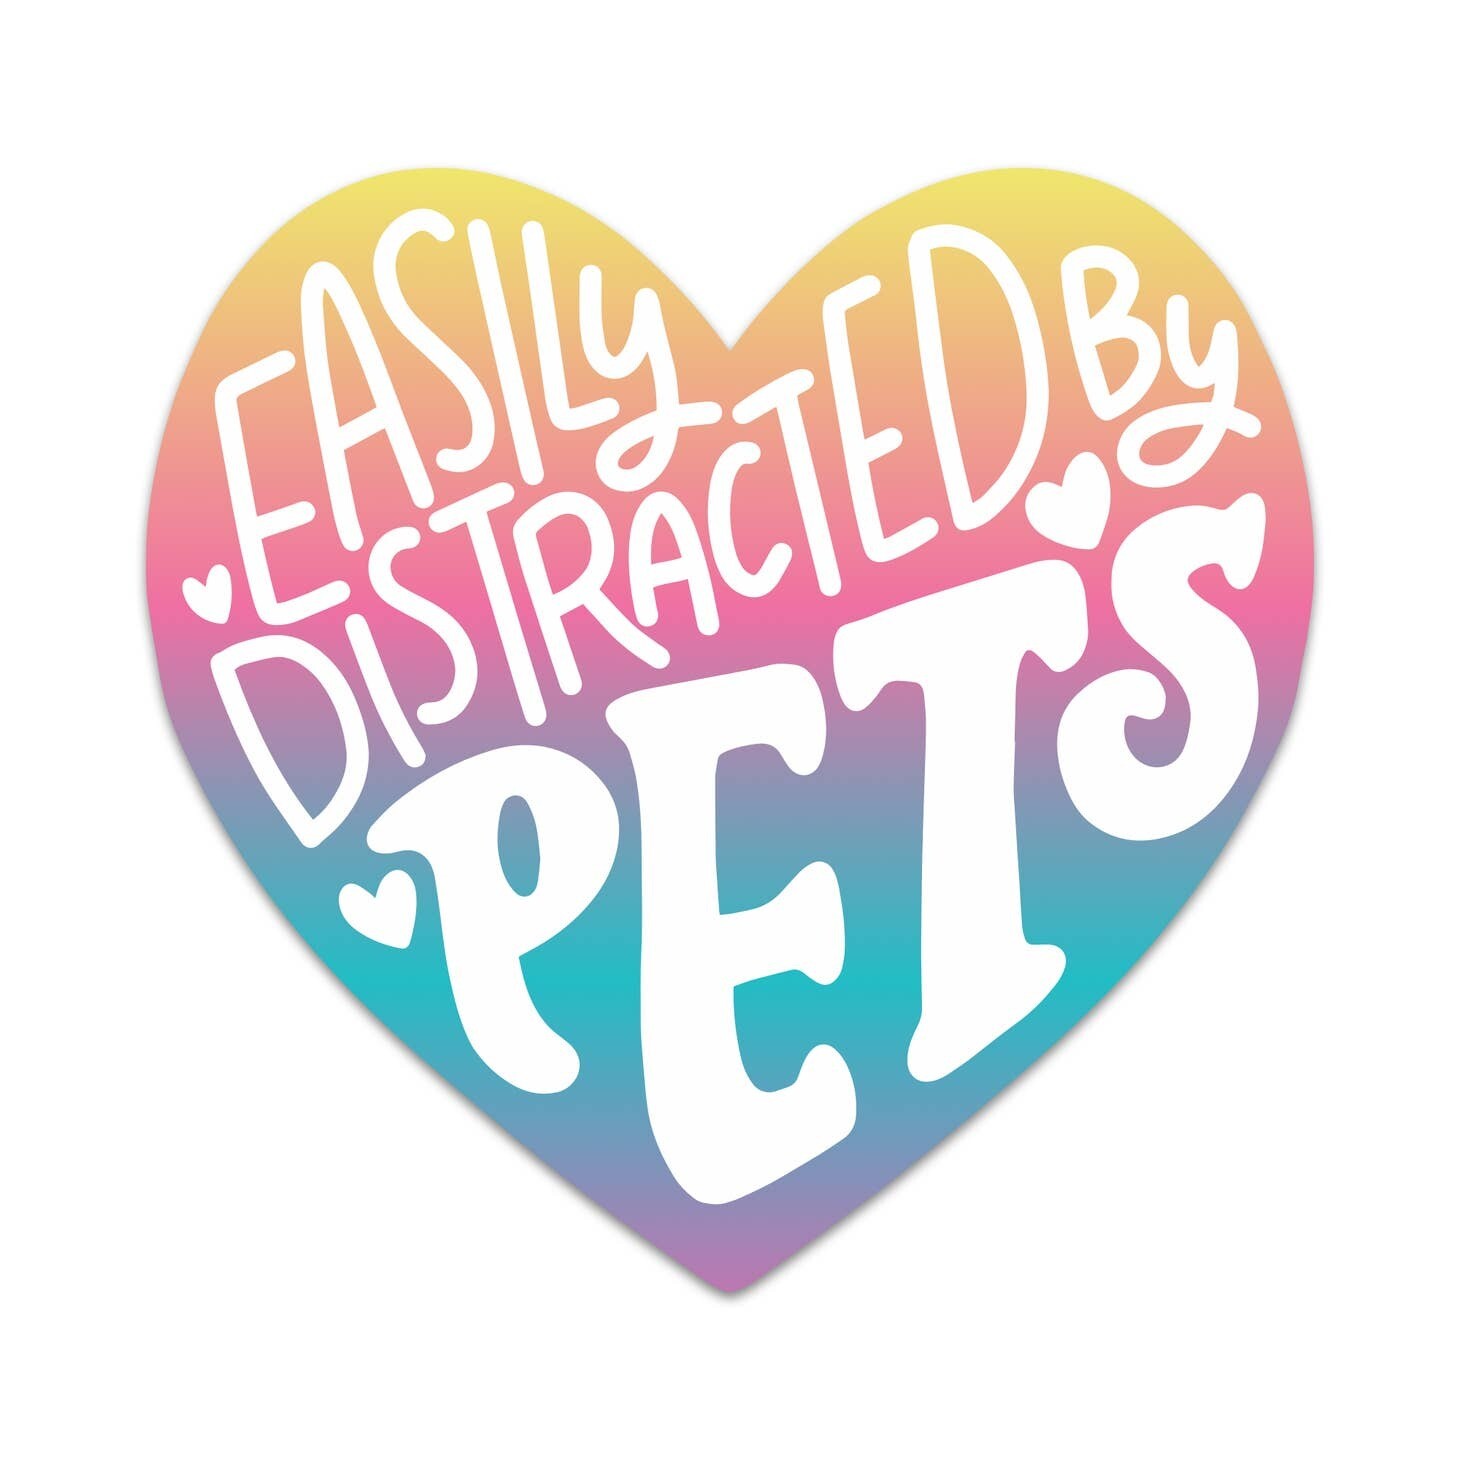 Easily Distracted by Pets Sticker